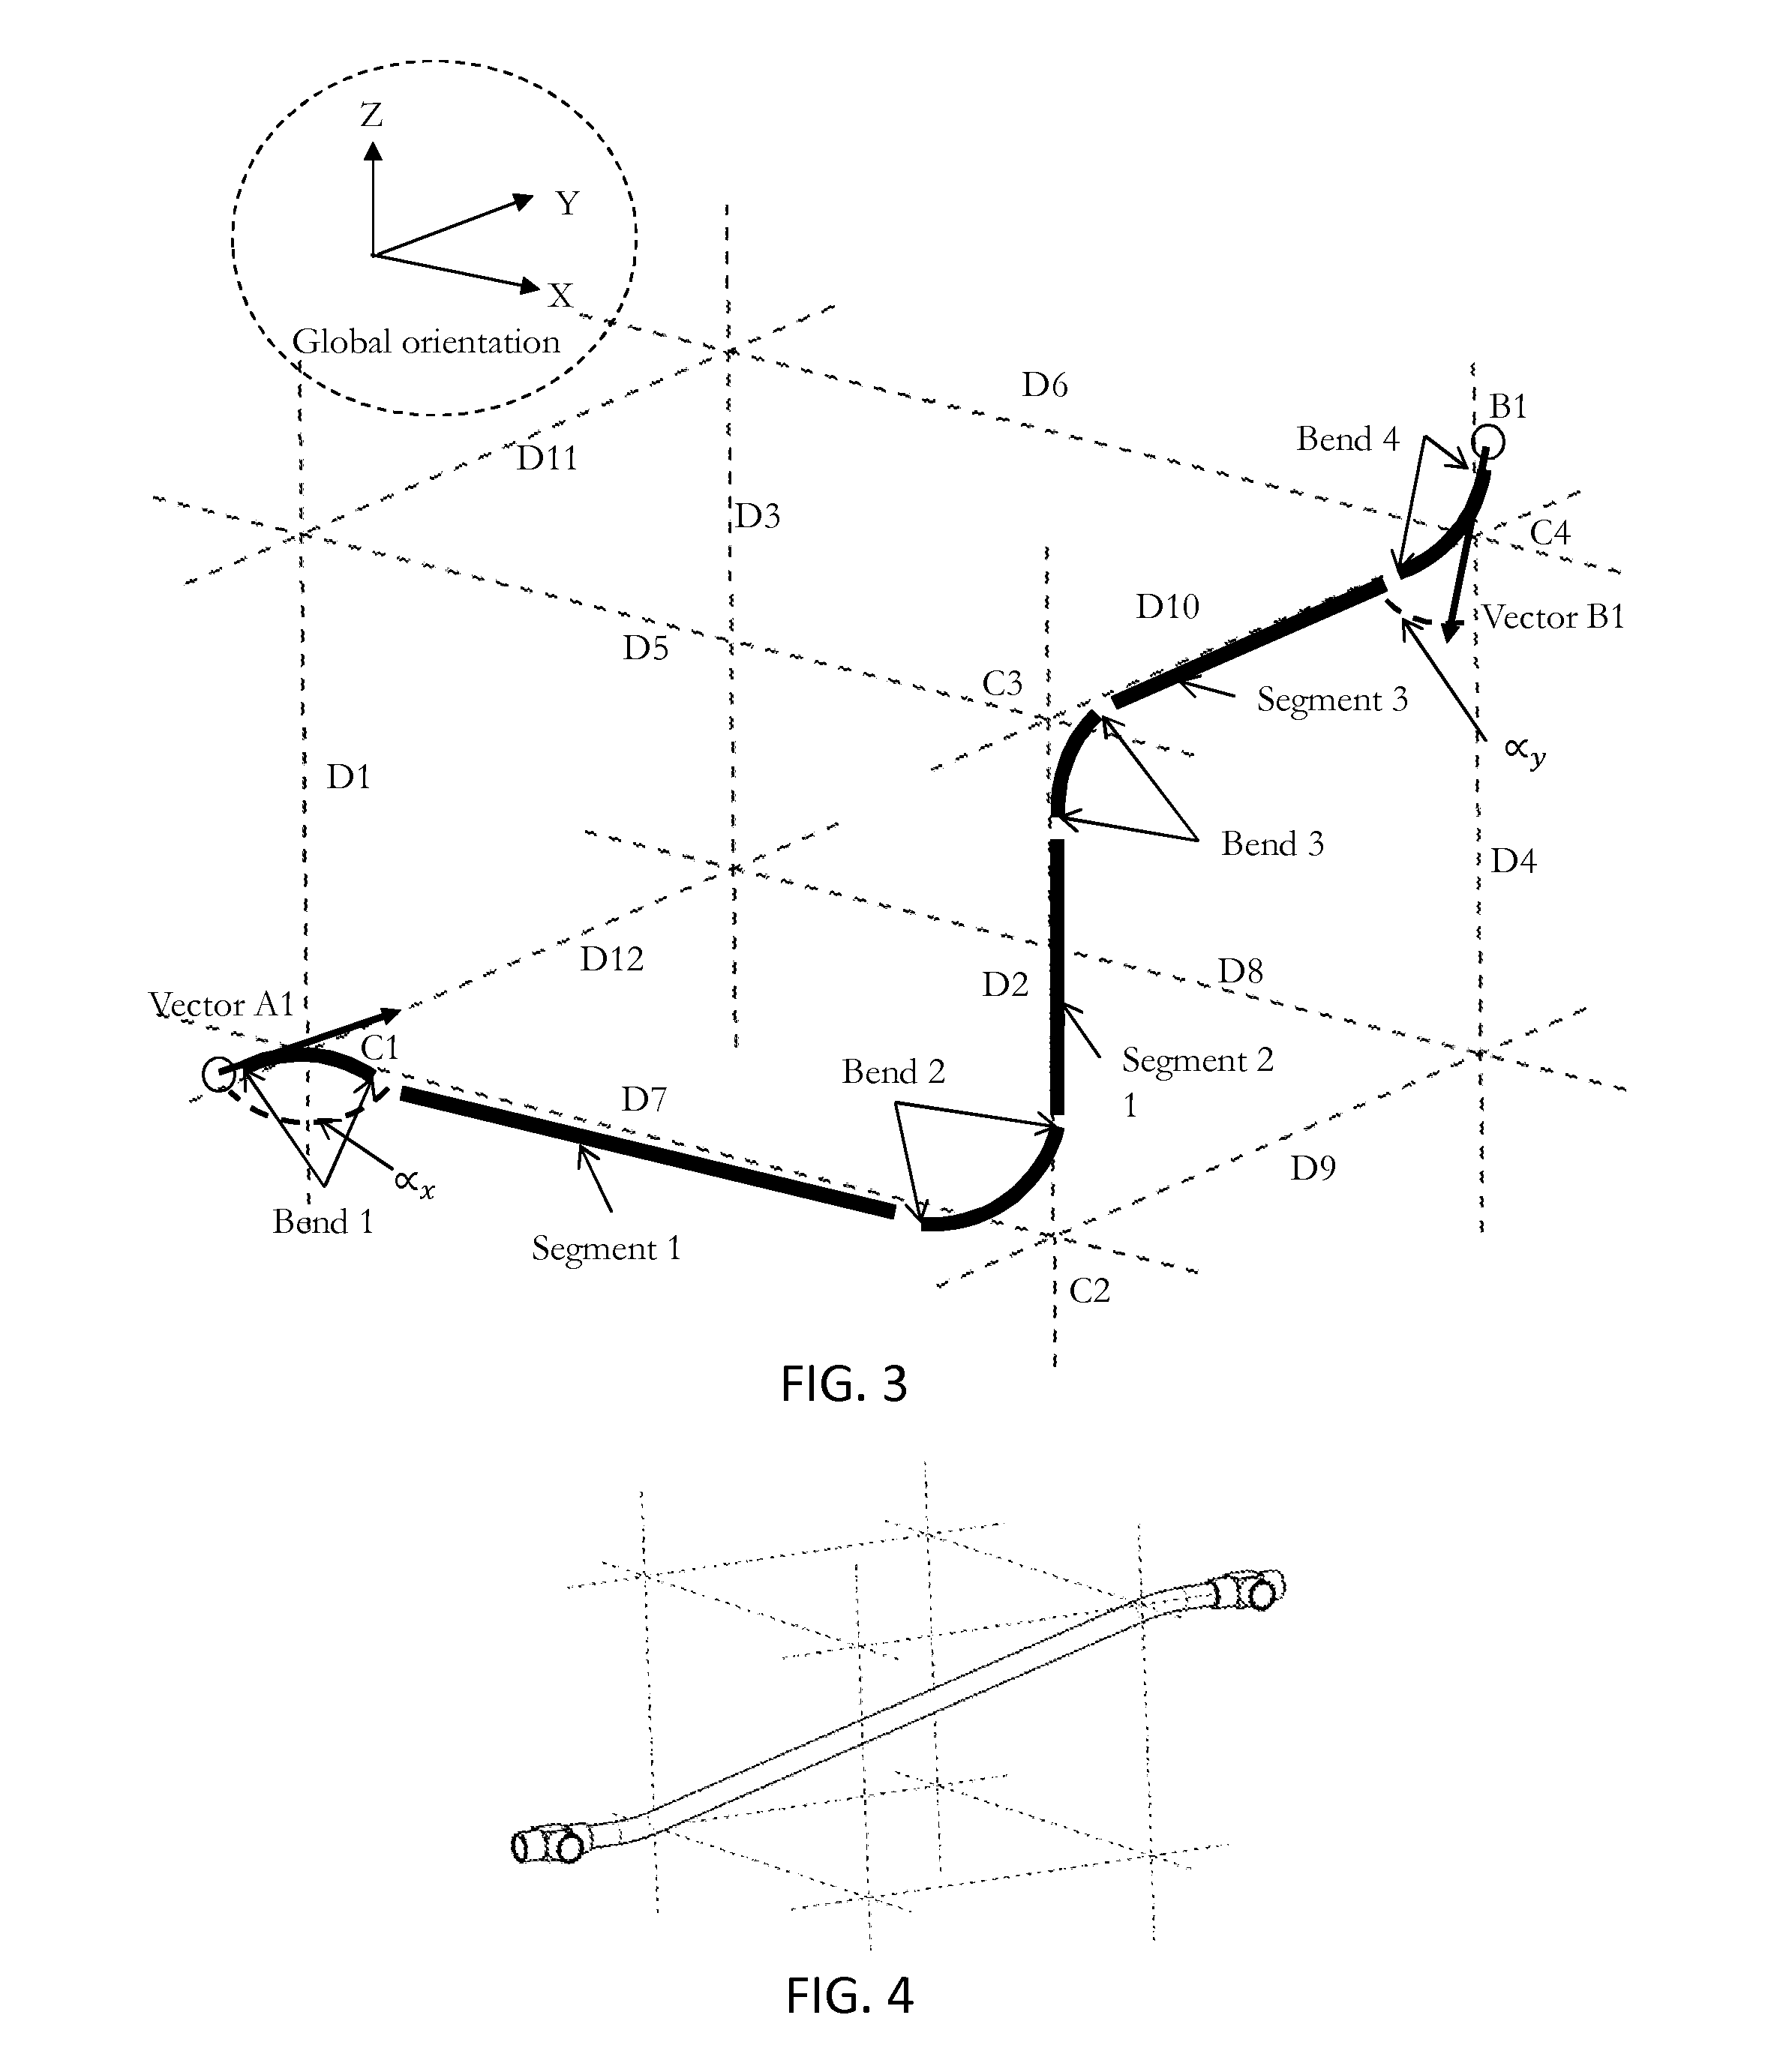 Design of a path connecting a first point to a second point in a three-dimensional scene